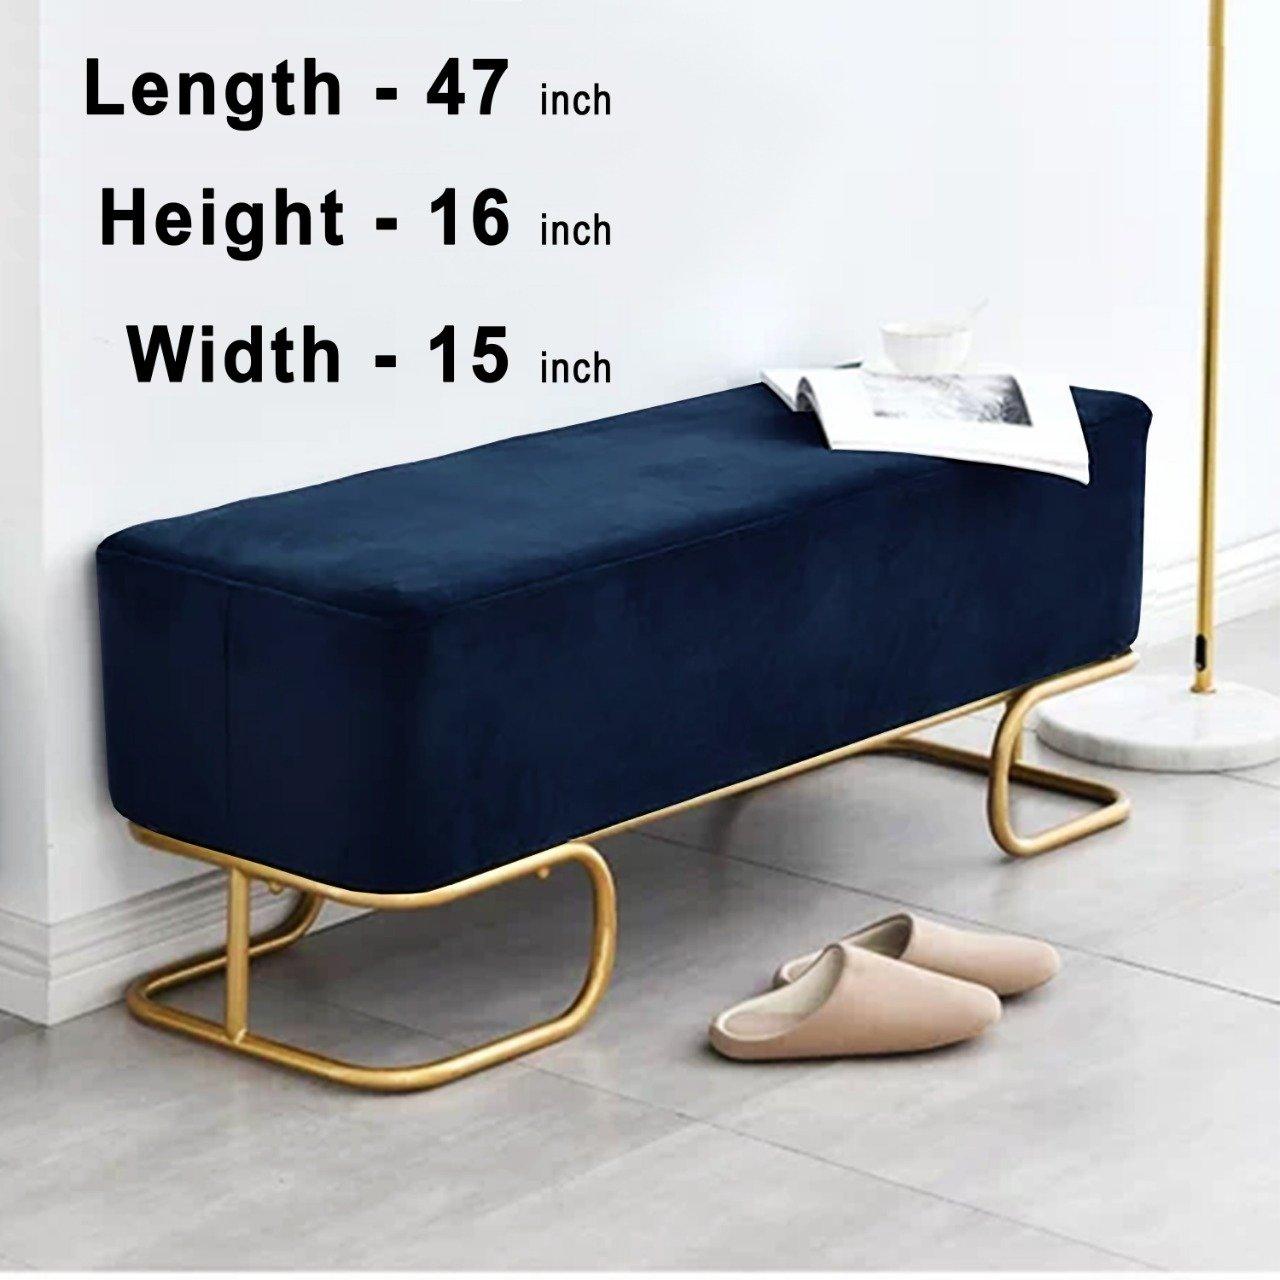 Luxury Wooden stool 3 Seater With Steel Stand -333 - 92Bedding